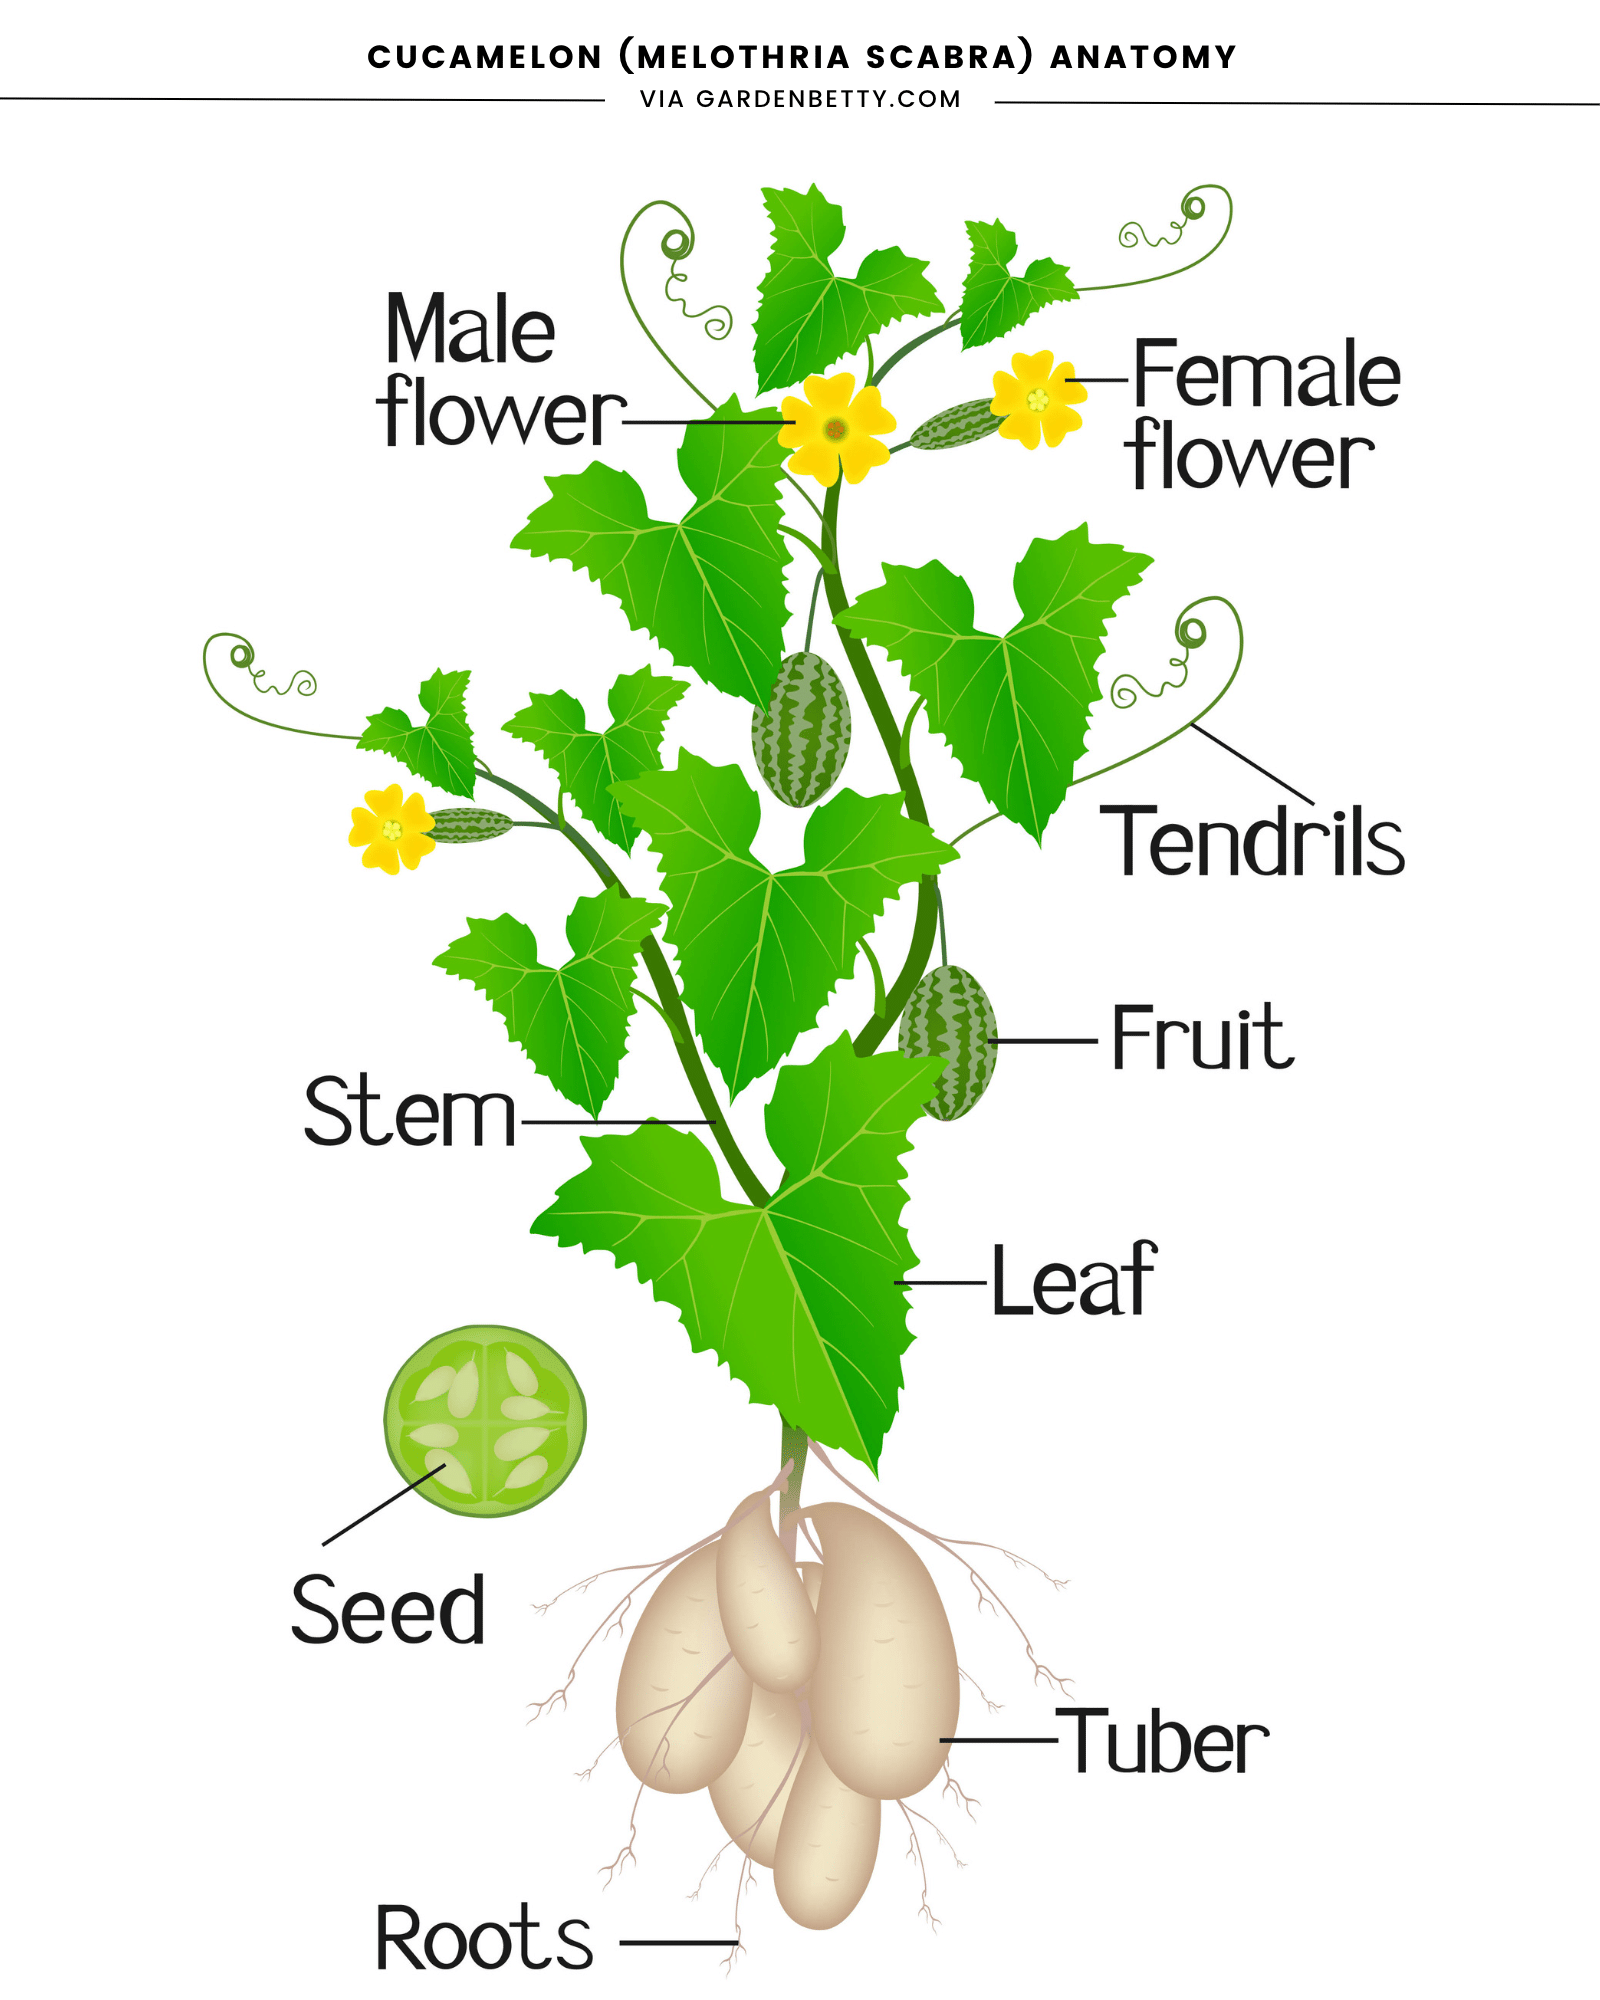 Illustration depicting the anatomy of a cucamelon (Melothria scabra) plant, from roots and tubers to flowers and fruits